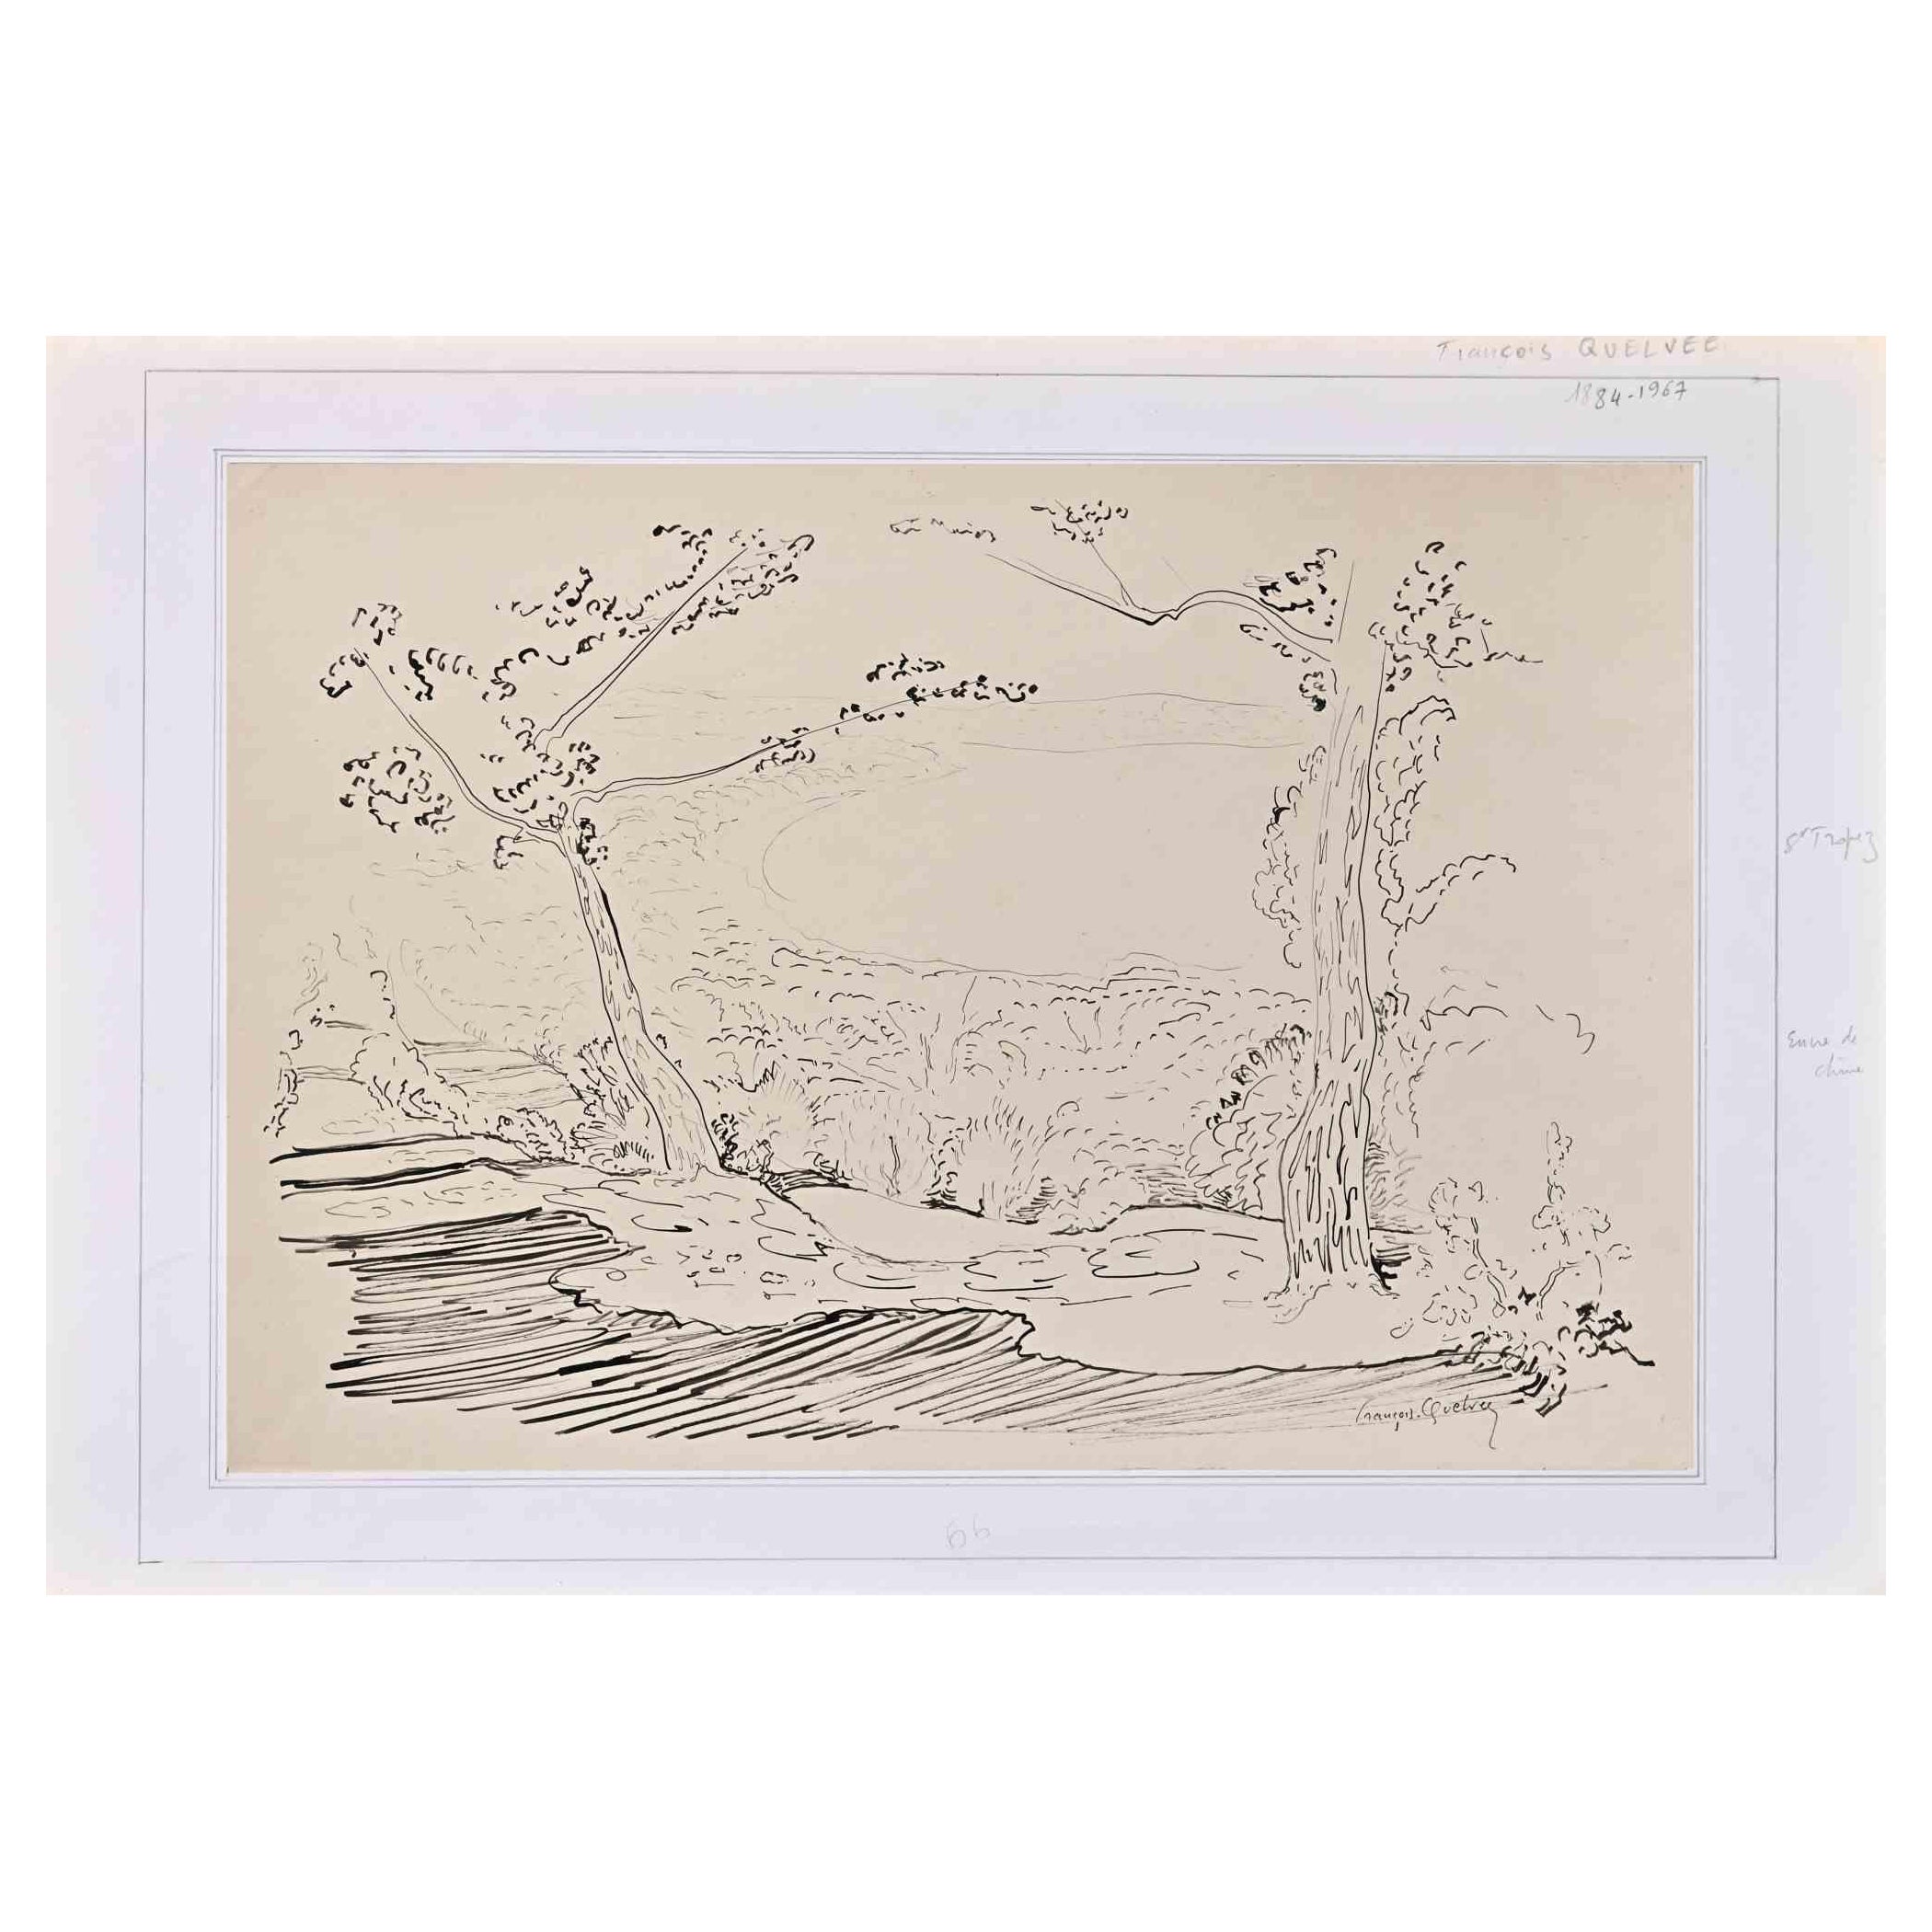 Landscape si an Original China Ink Drawing realized by François Quelvée (1884-1967).

Good condition on a yellowed paper included a white cardboard passpartout (37.5x55 cm).

Hand-signed by the artist on the lower right corner.

François, Albert,